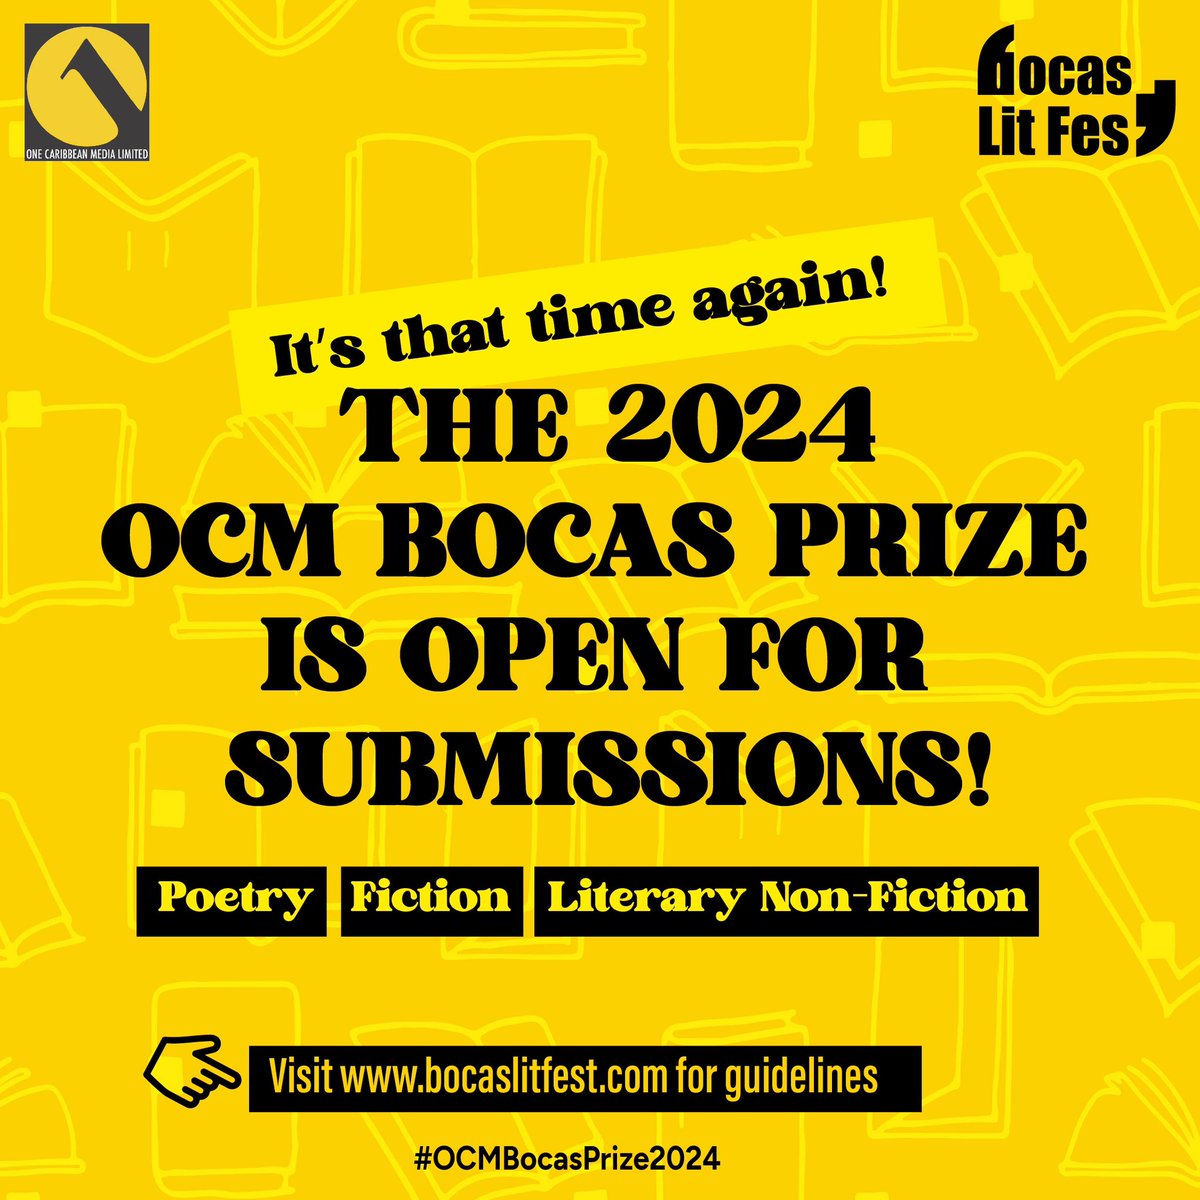 🏆 The 2024 OCM Bocas Prize for Caribbean Literature is now open for submissions! 🏆

Now in its 14th year, the OCM Bocas Prize celebrates books of fiction, poetry, & non-fiction by writers of Caribbean birth/citizenship.

bocaslitfest.com/awards/ocm/

@OCM_Group
#OCMBocasPrize2024